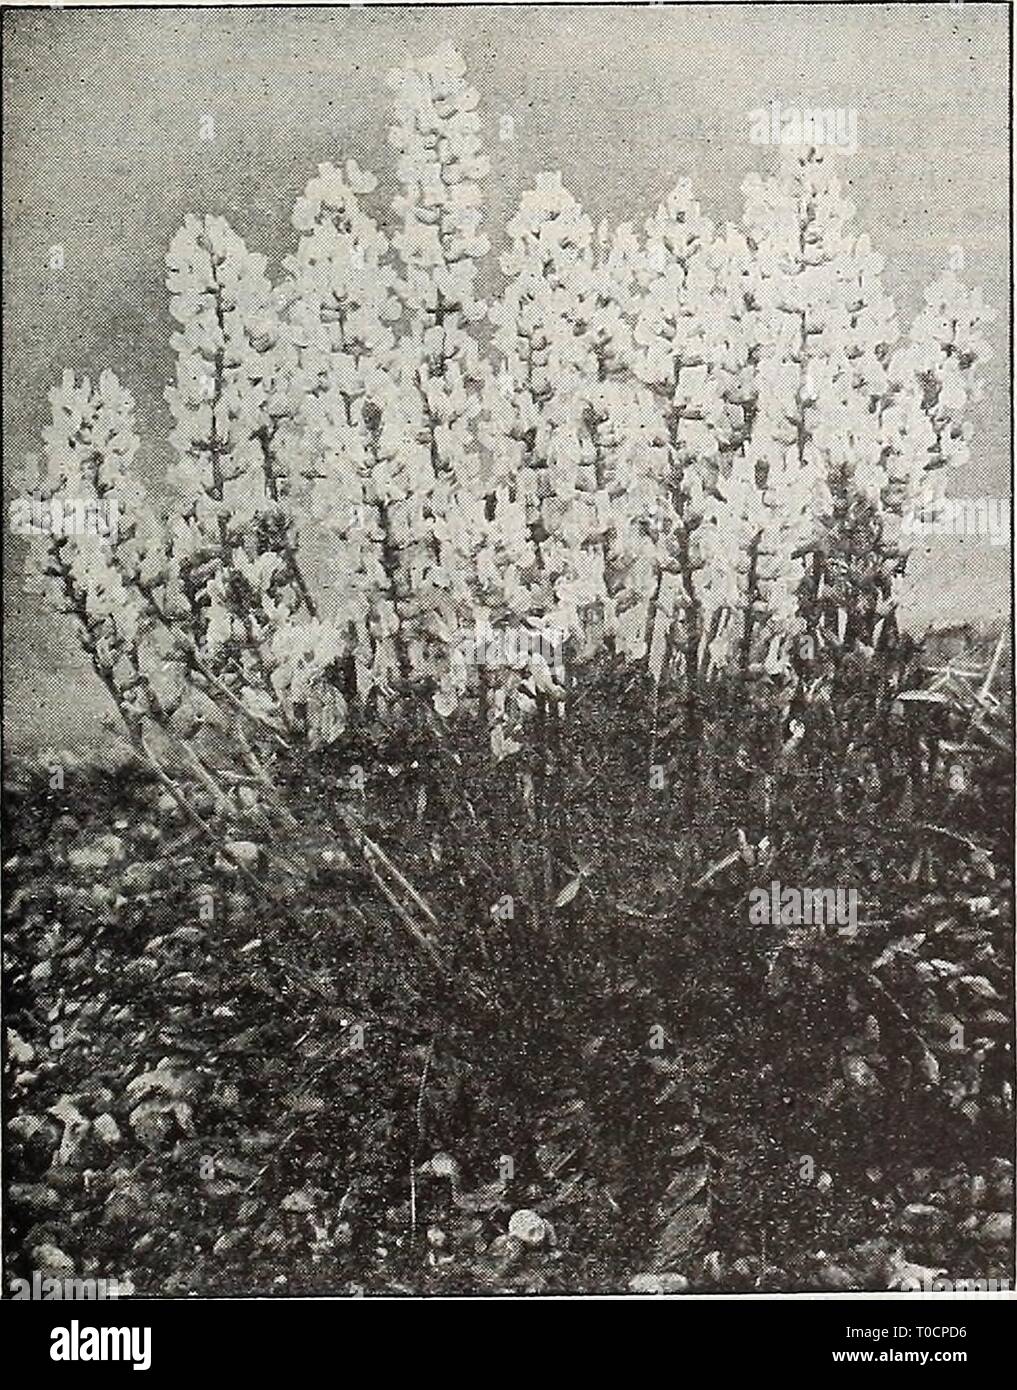 Dreer's garden book 1917 (1917) Dreer's garden book 1917 dreersgardenbook1917henr Year: 1917  Oxytropis Hyerida Grandiflora MONTBRETIA CKllOtliera (Evening Primrose). The Evening Primroses are elegant sub- jects for growing in an exposed, sunny posi- tion, either in the border or on the rockery, blooming the greater part of the summer. Csespitosa. Large, pure white, changing Monarda Didyma to rose; 1 foot- Missouriensis. Large golden yellow; 1 foot. Pilgrimi. Large clusters of bright yellow flowers. Speciosa. Pure white flowers 3 inches across; 18 inches. 20 cts. each; $2.00 per doz.; $12.00 p Stock Photo